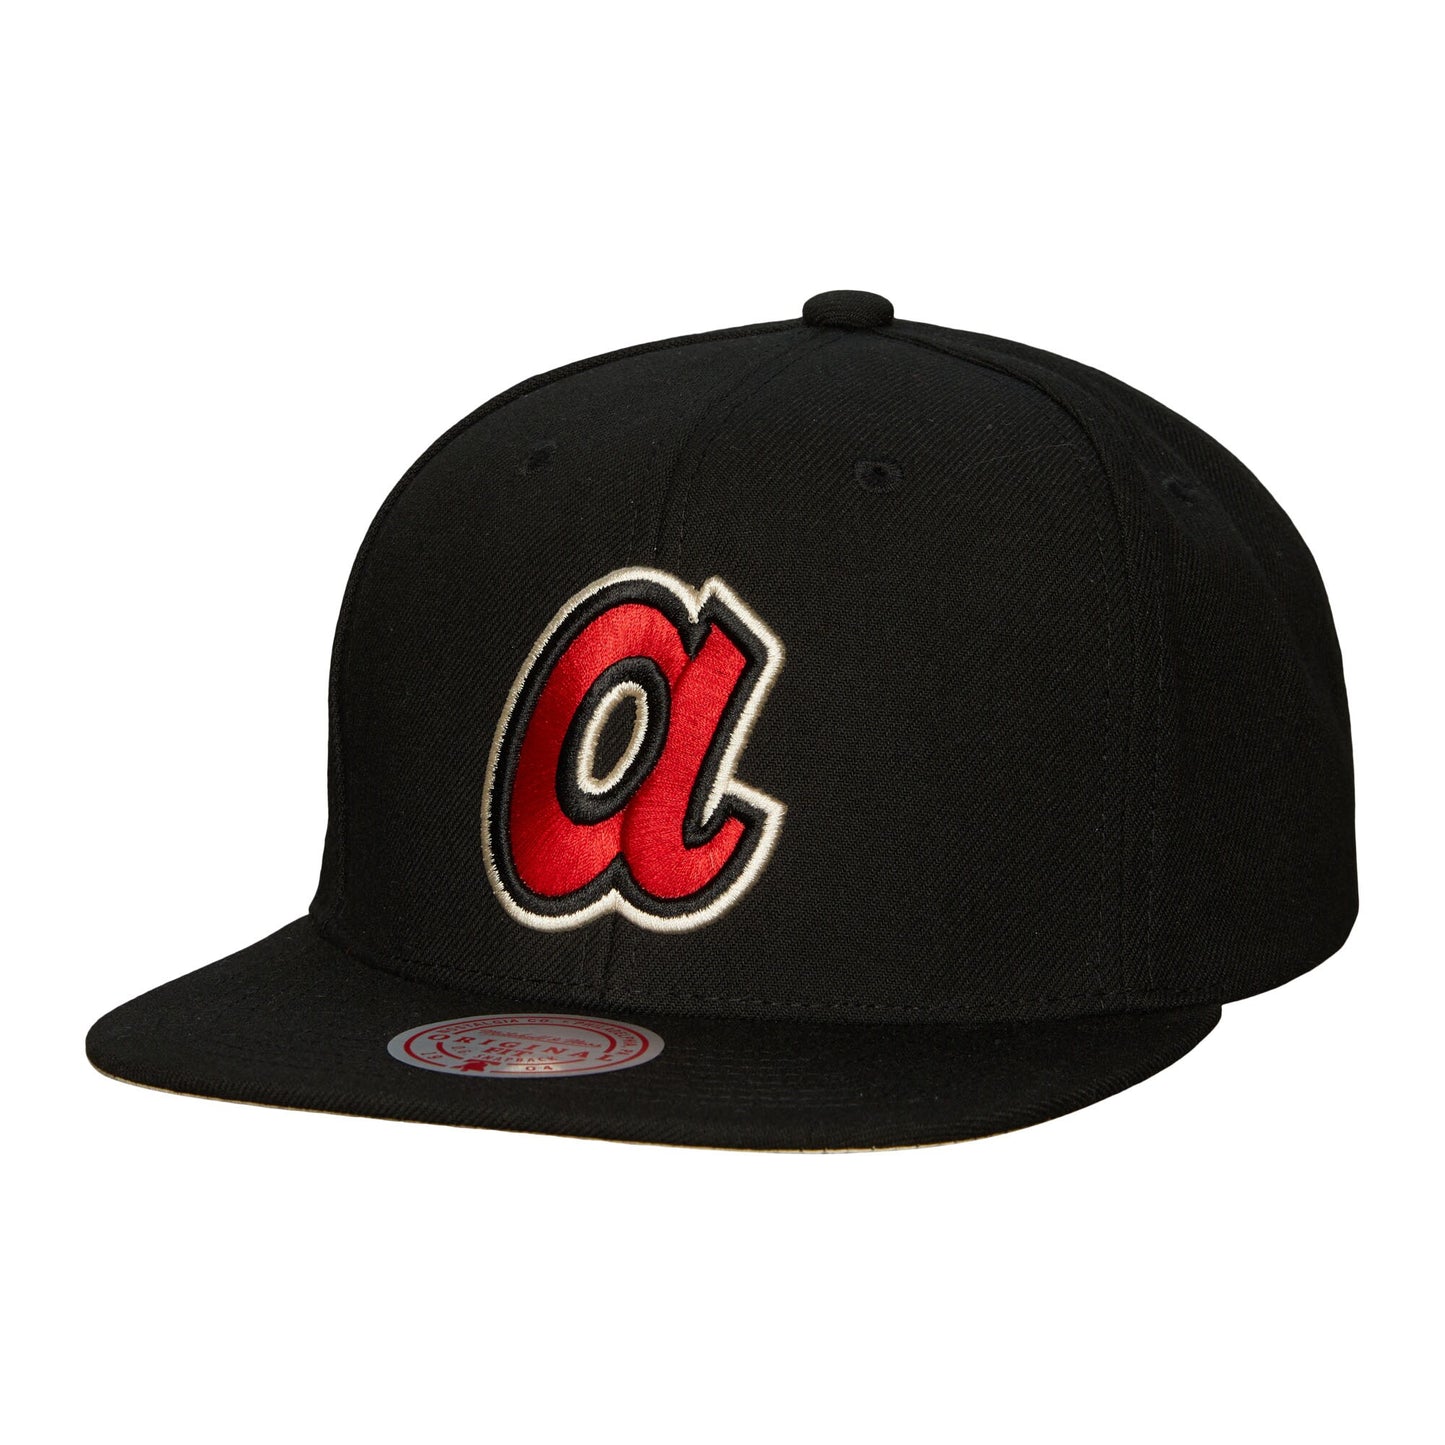 Atlanta Braves Mitchell & Ness Cooperstown Collection True Classics Snapback Hat - Black